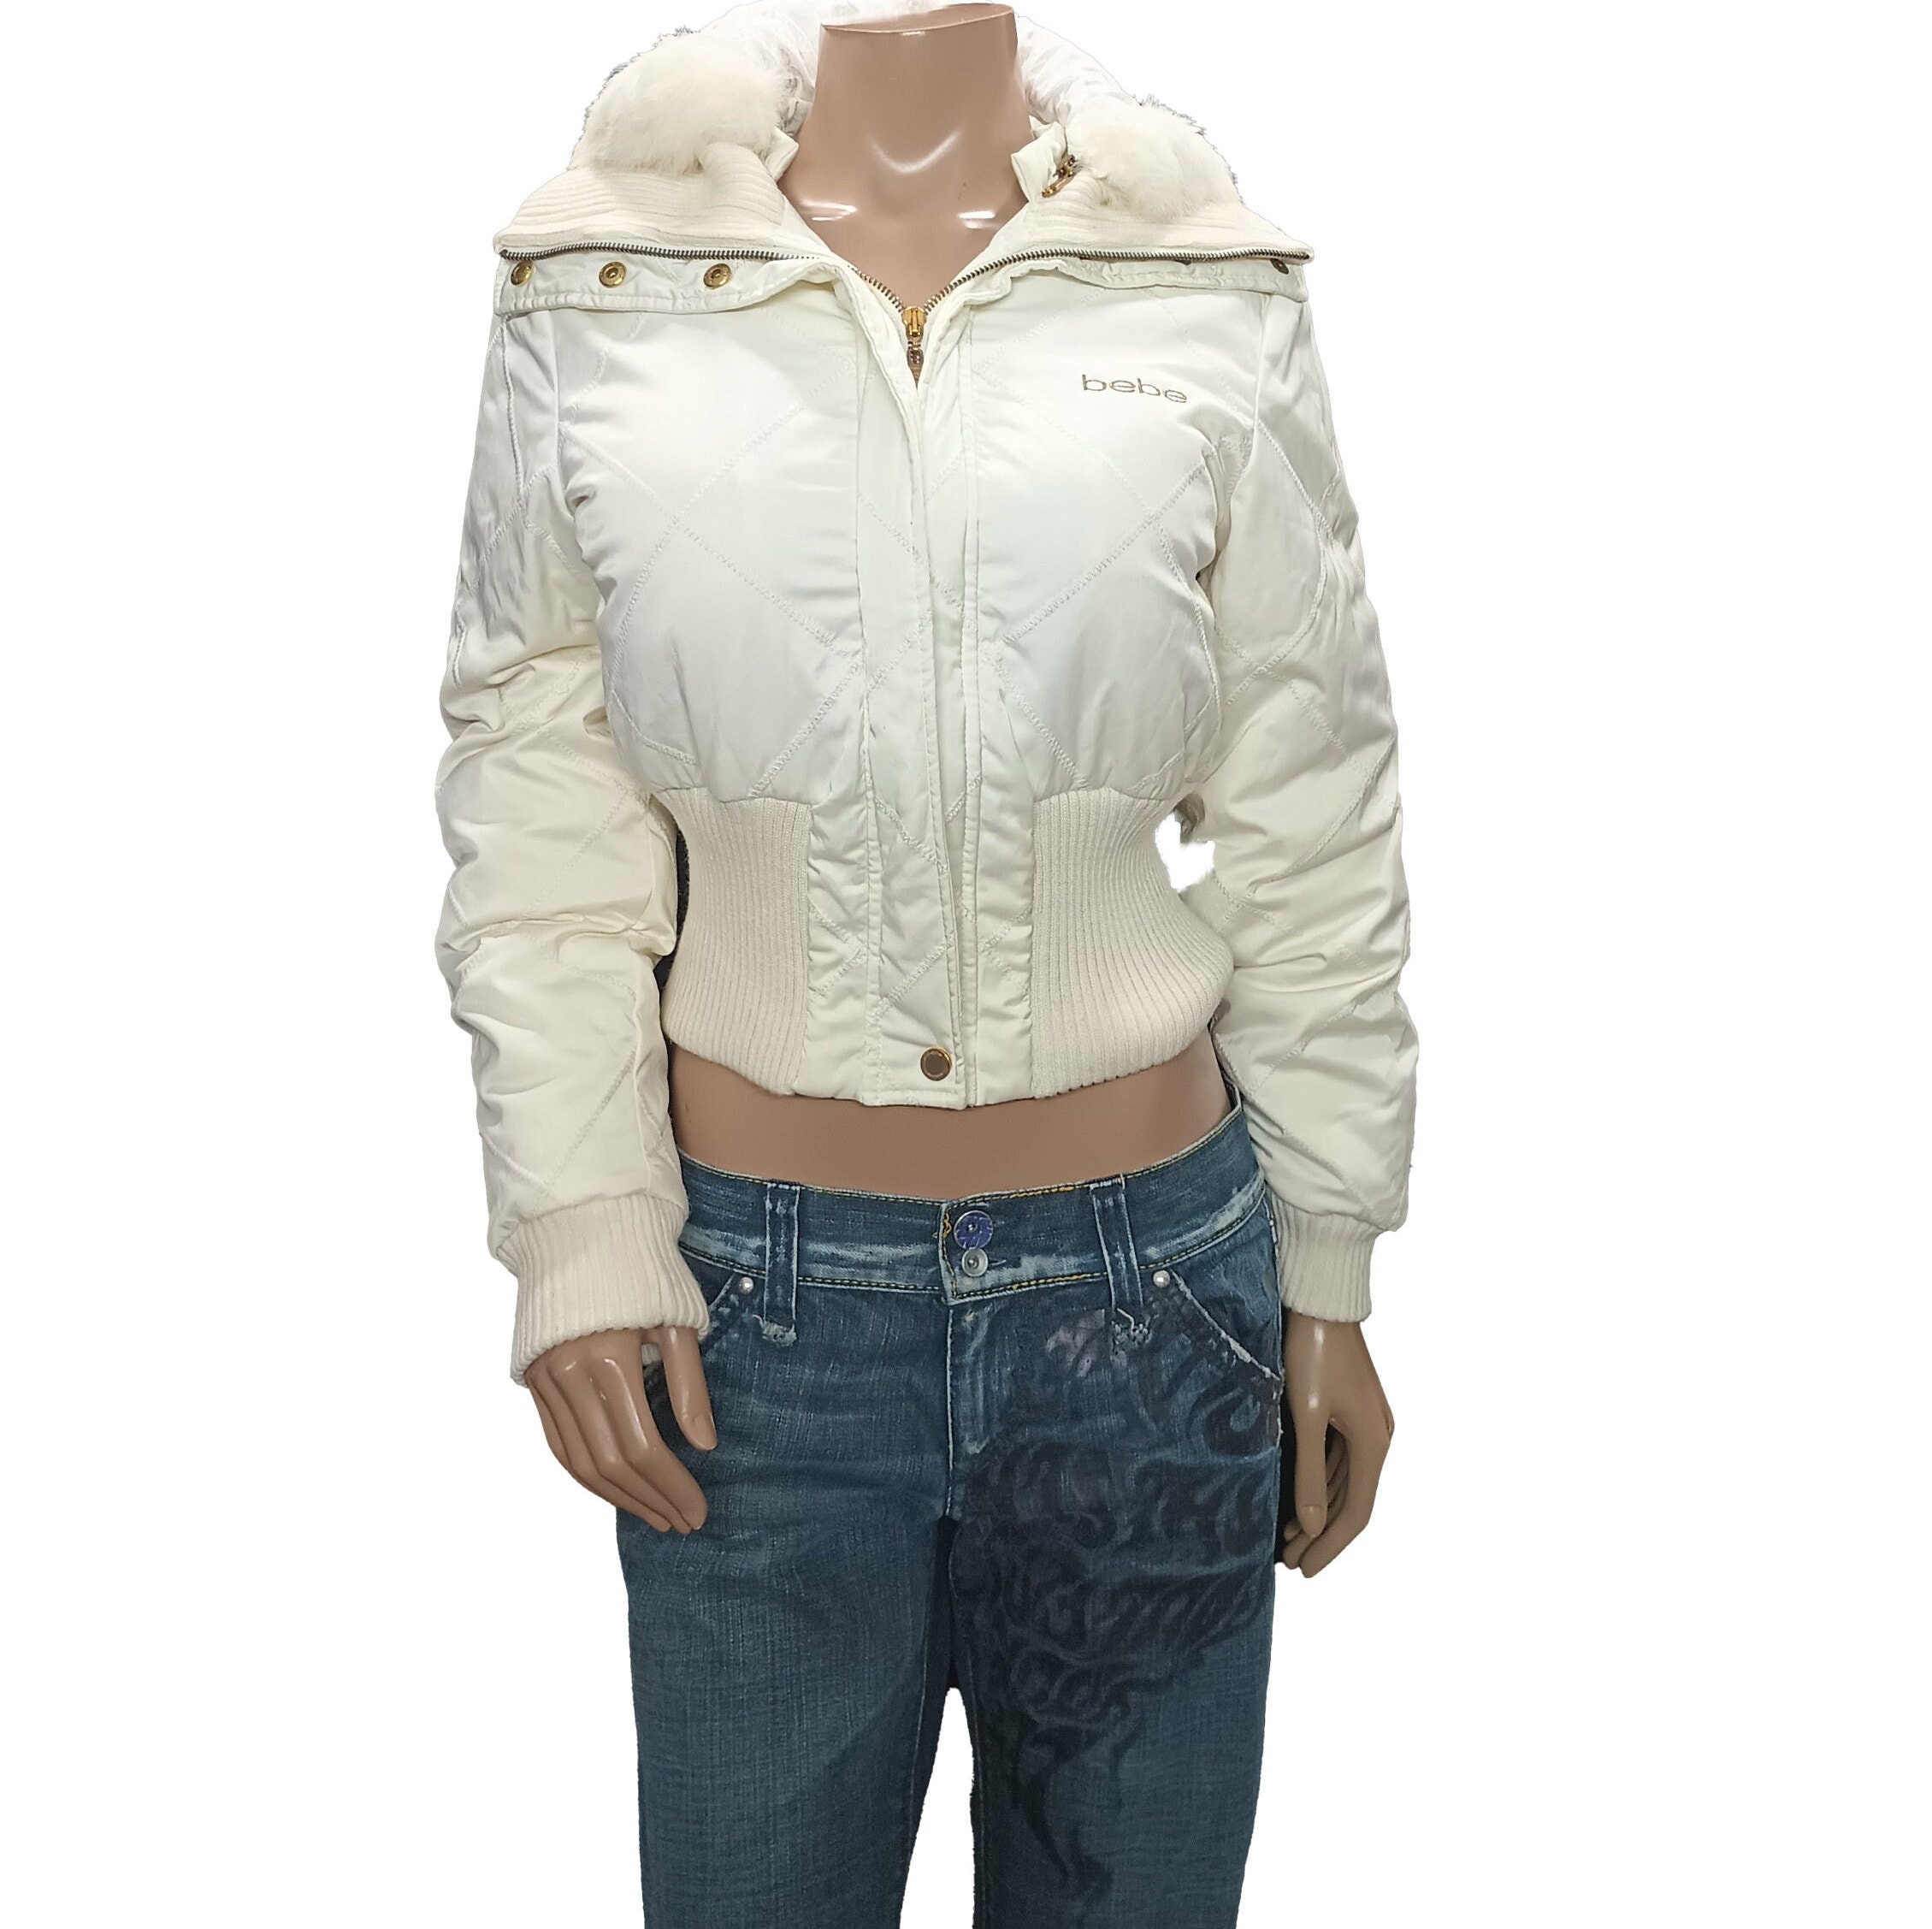 Juicy Couture puffer jacket women Off White Size Small